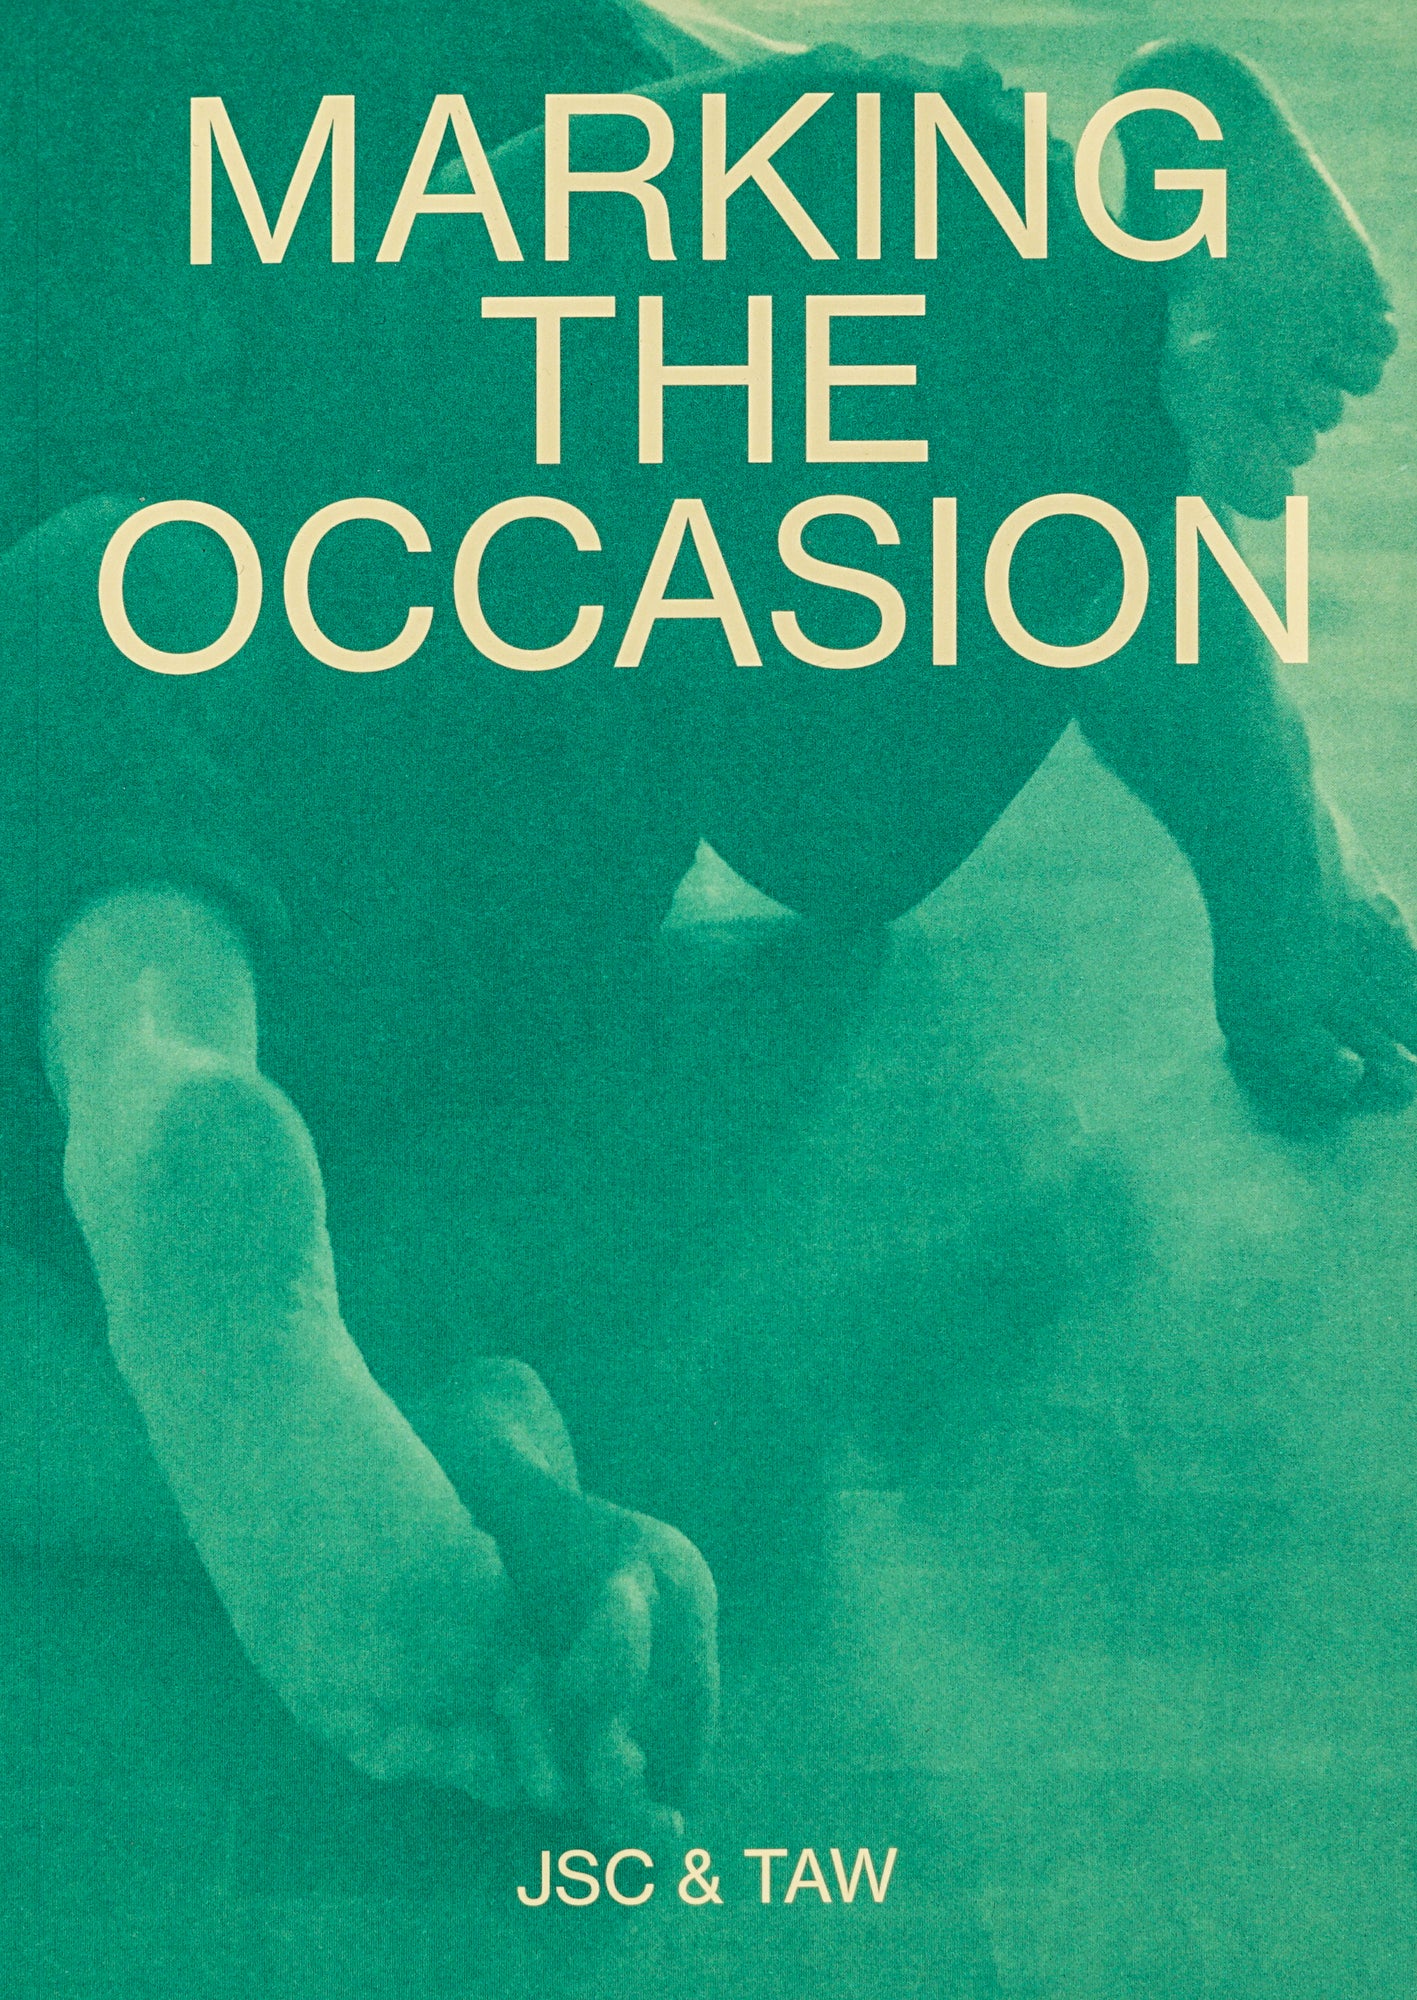 Cover, reading the title, 'MARKING THE OCCASION' in capital light yellow letters and sans serif type, centred on the top of the frame. The background is made up of a photograph of two entangled pairs of feet on what seems to be a dance floor.  The photograph is green, as if screen printed with a single colour.